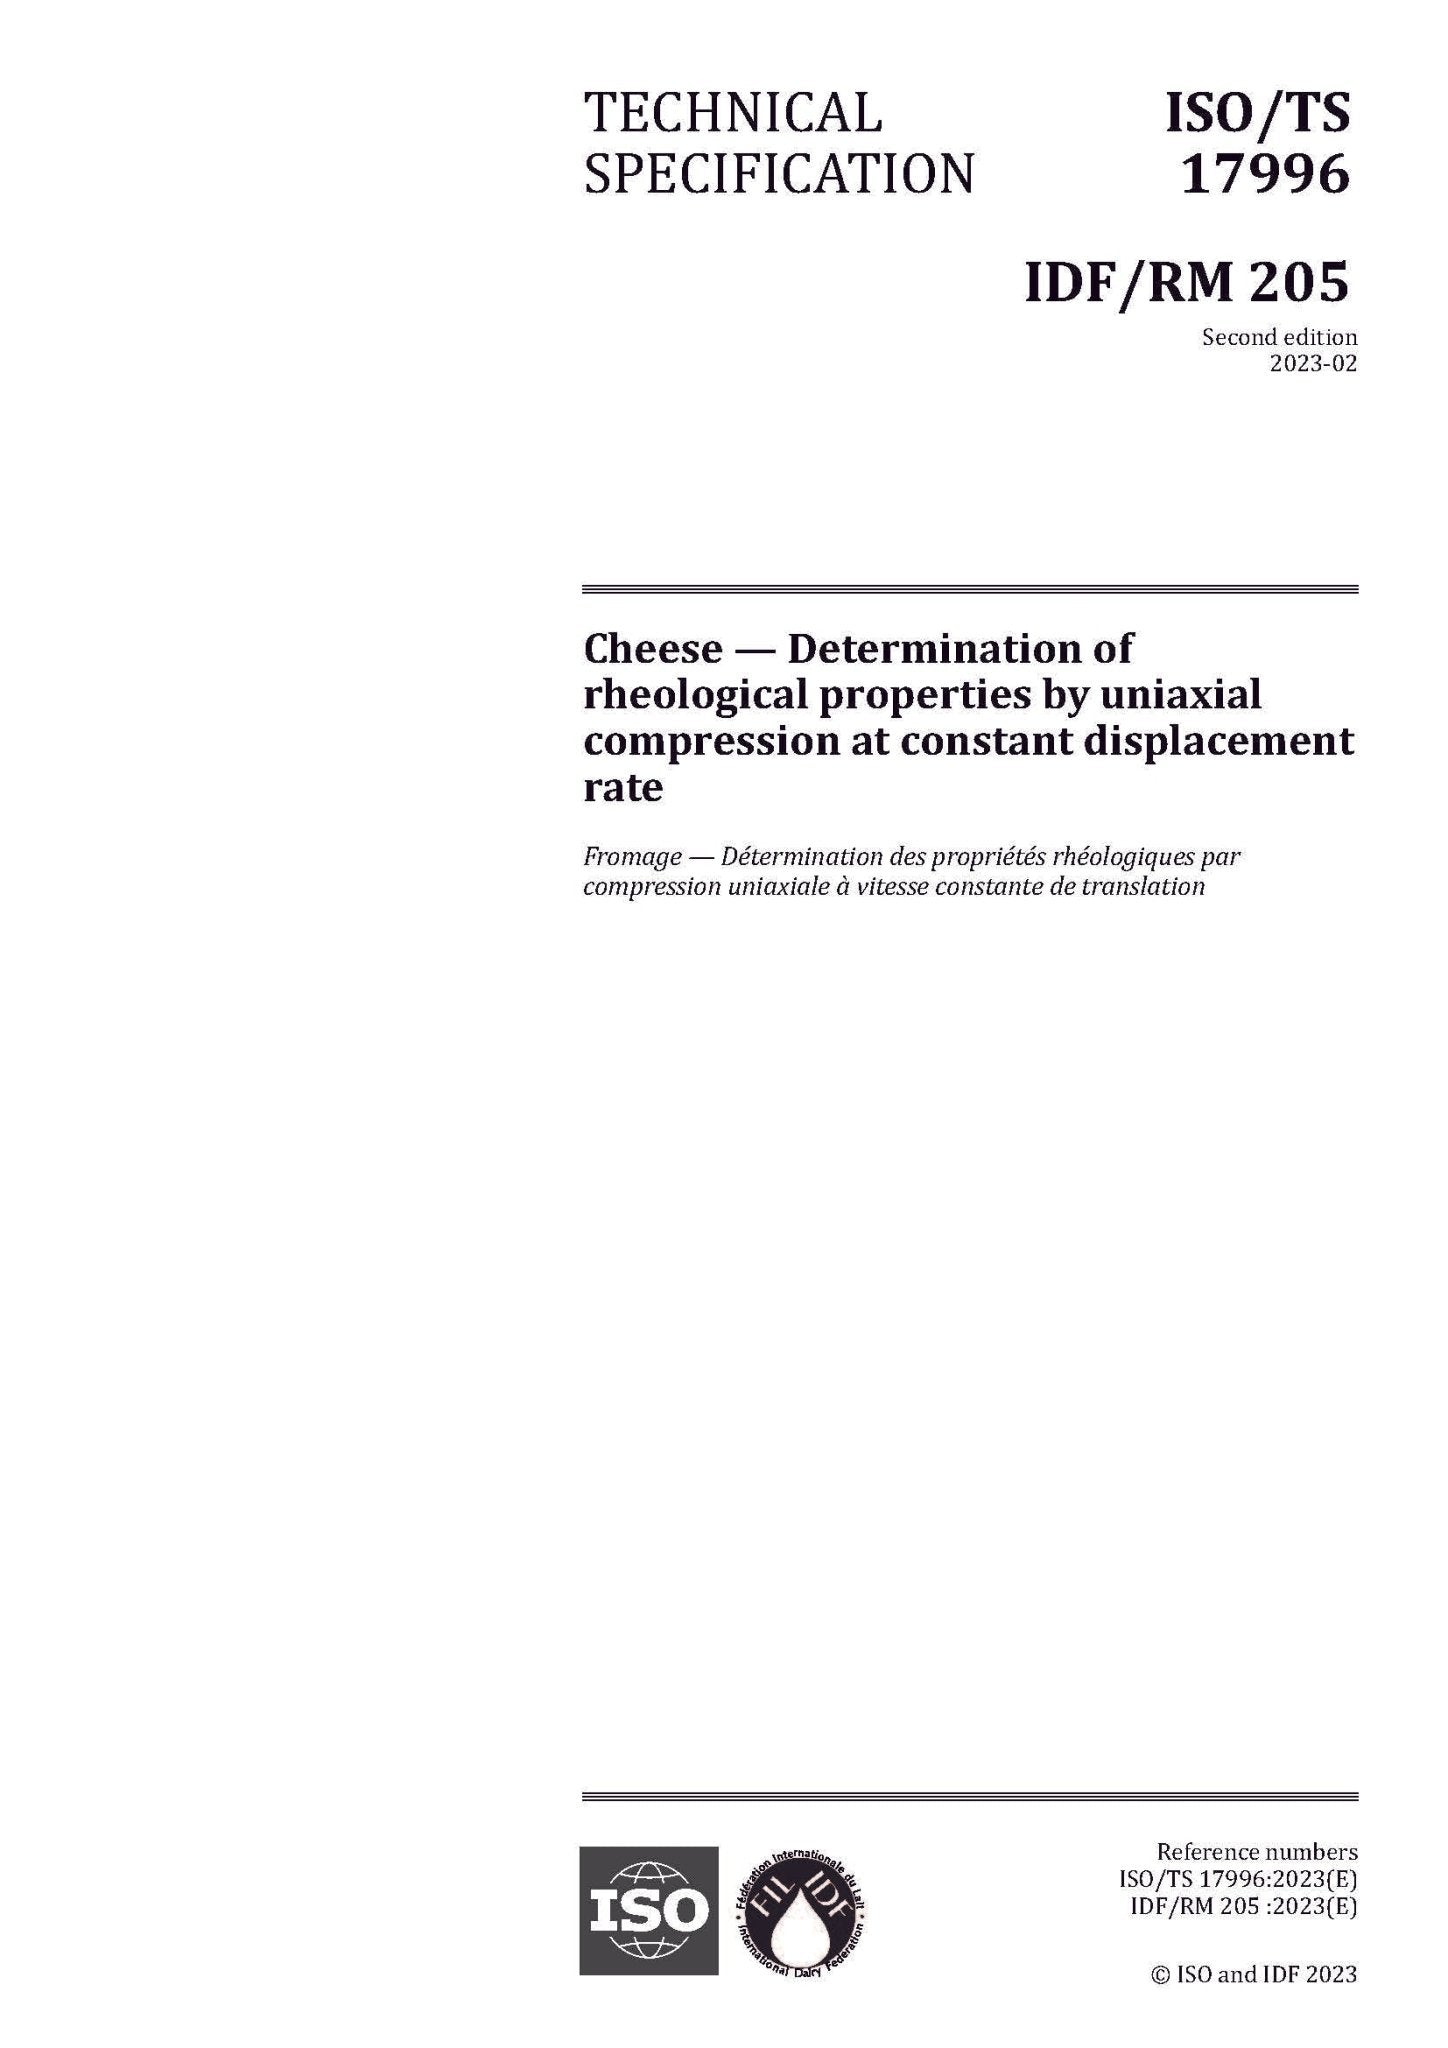 ISO/TS 17996 | IDF/RM 205 : 2023 Cheese — Determination of rheological properties by uniaxial compression at constant displacement rate - FIL-IDF